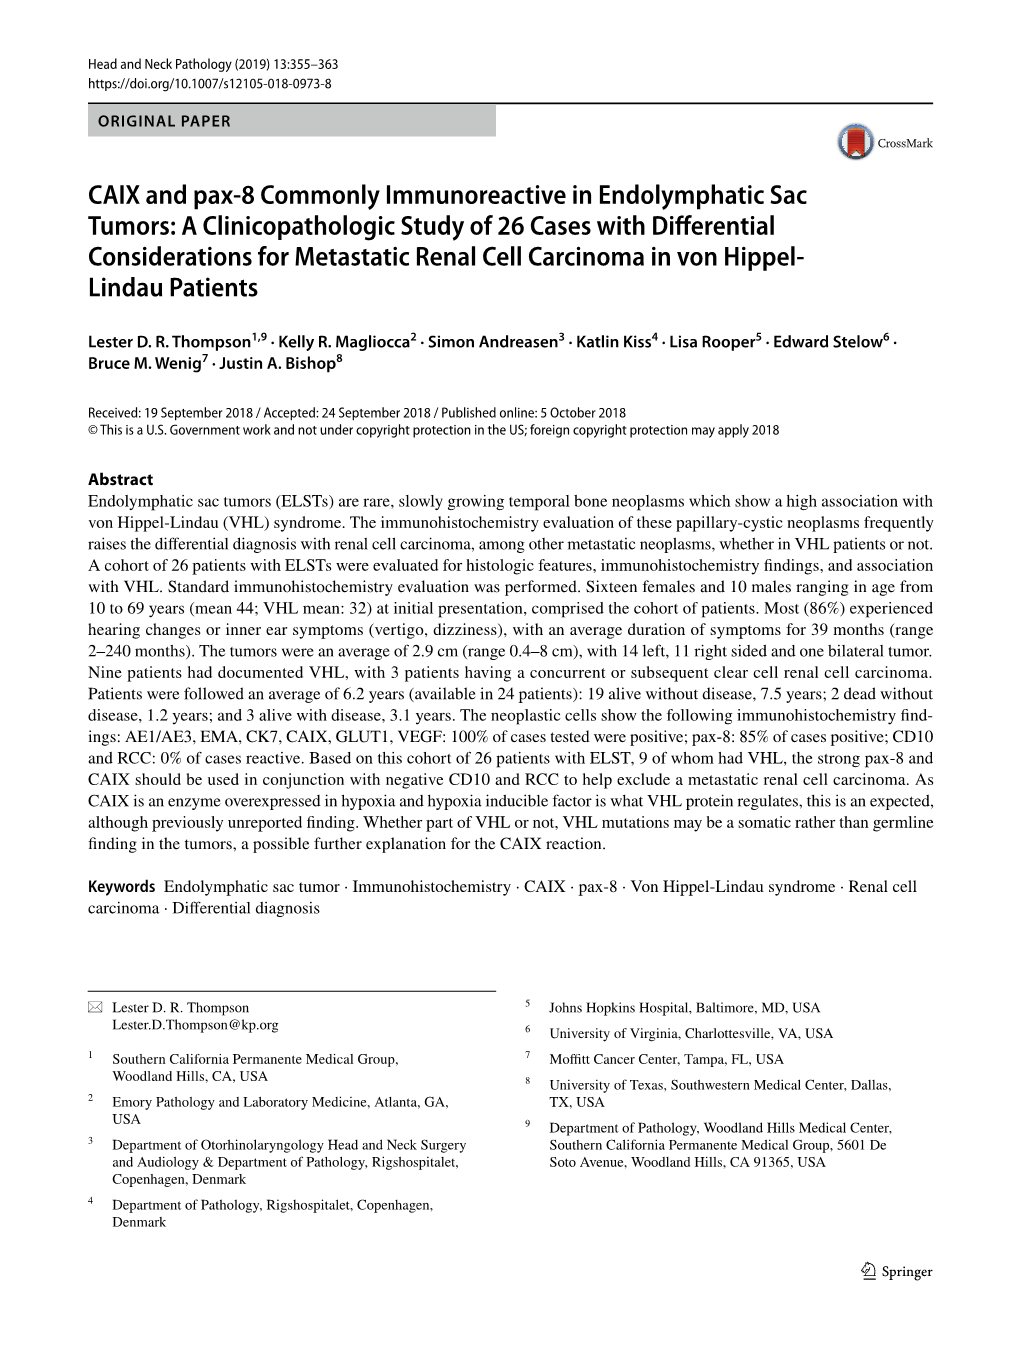 CAIX and Pax-8 Commonly Immunoreactive in Endolymphatic